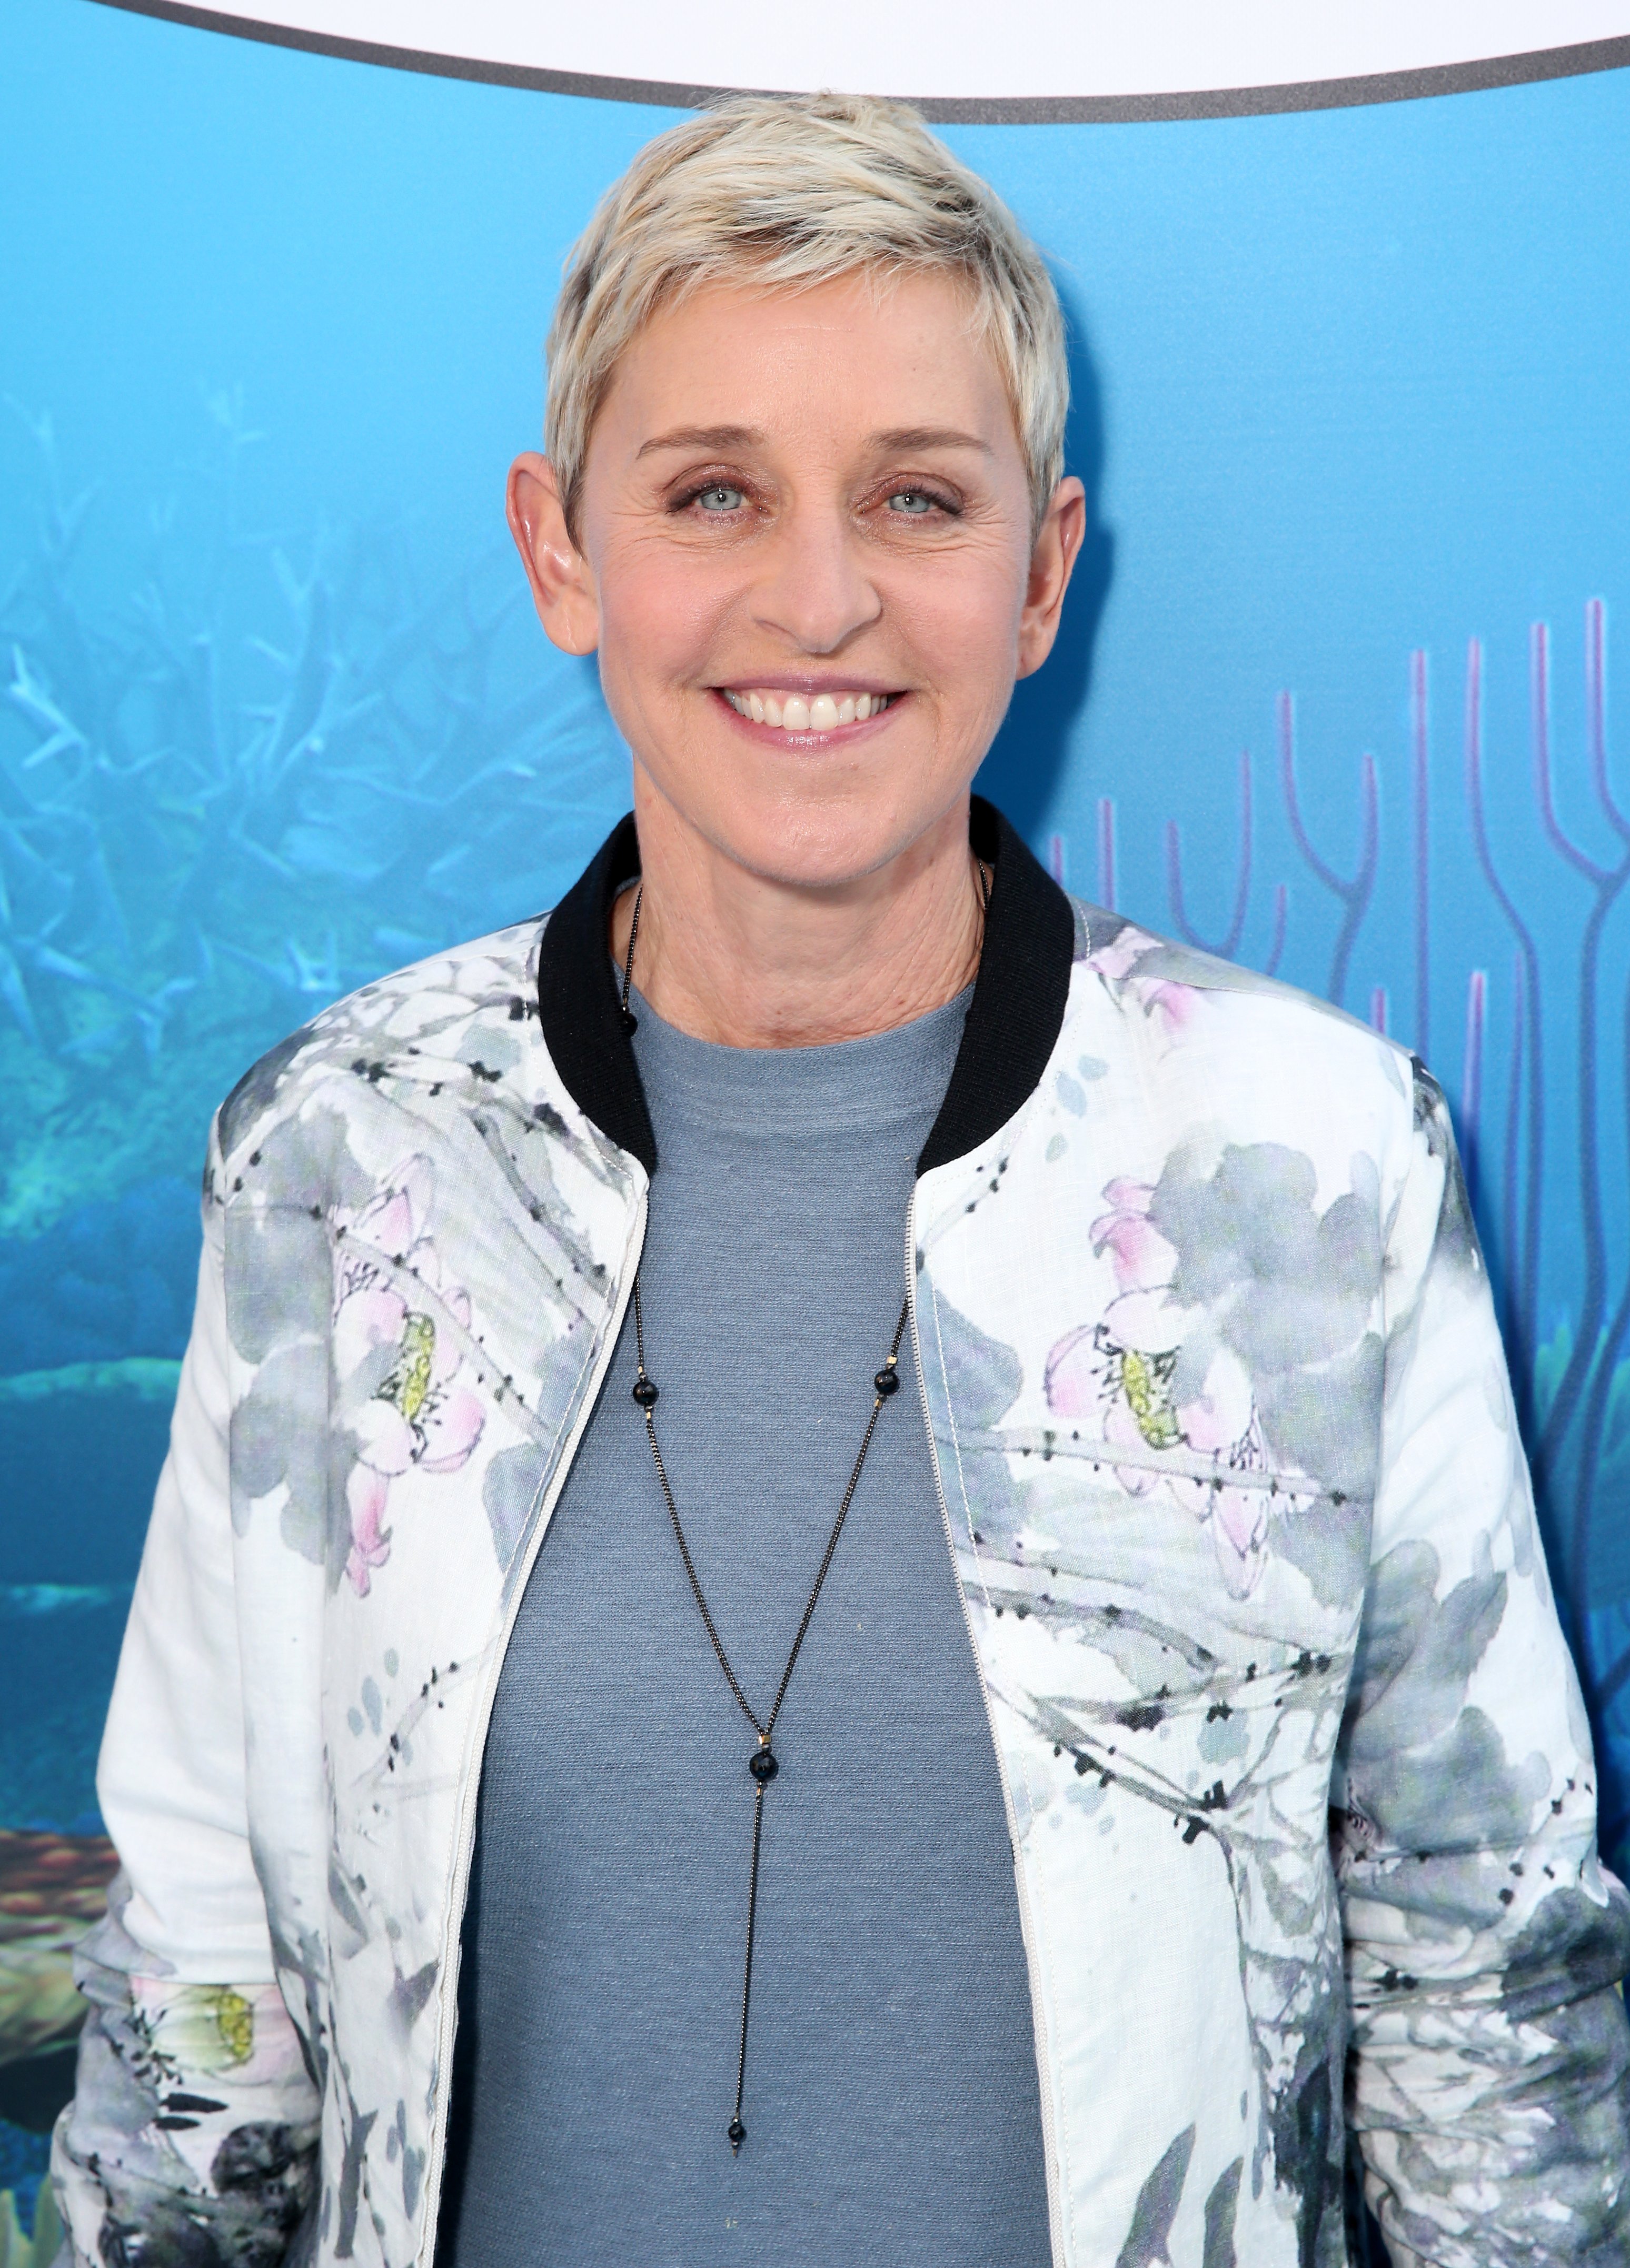 Ellen DeGeneres attending the world premiere of Disney-Pixar's 'Finding Dory' on June 8, 2016 in Hollywood, California. | Source: Getty Images 